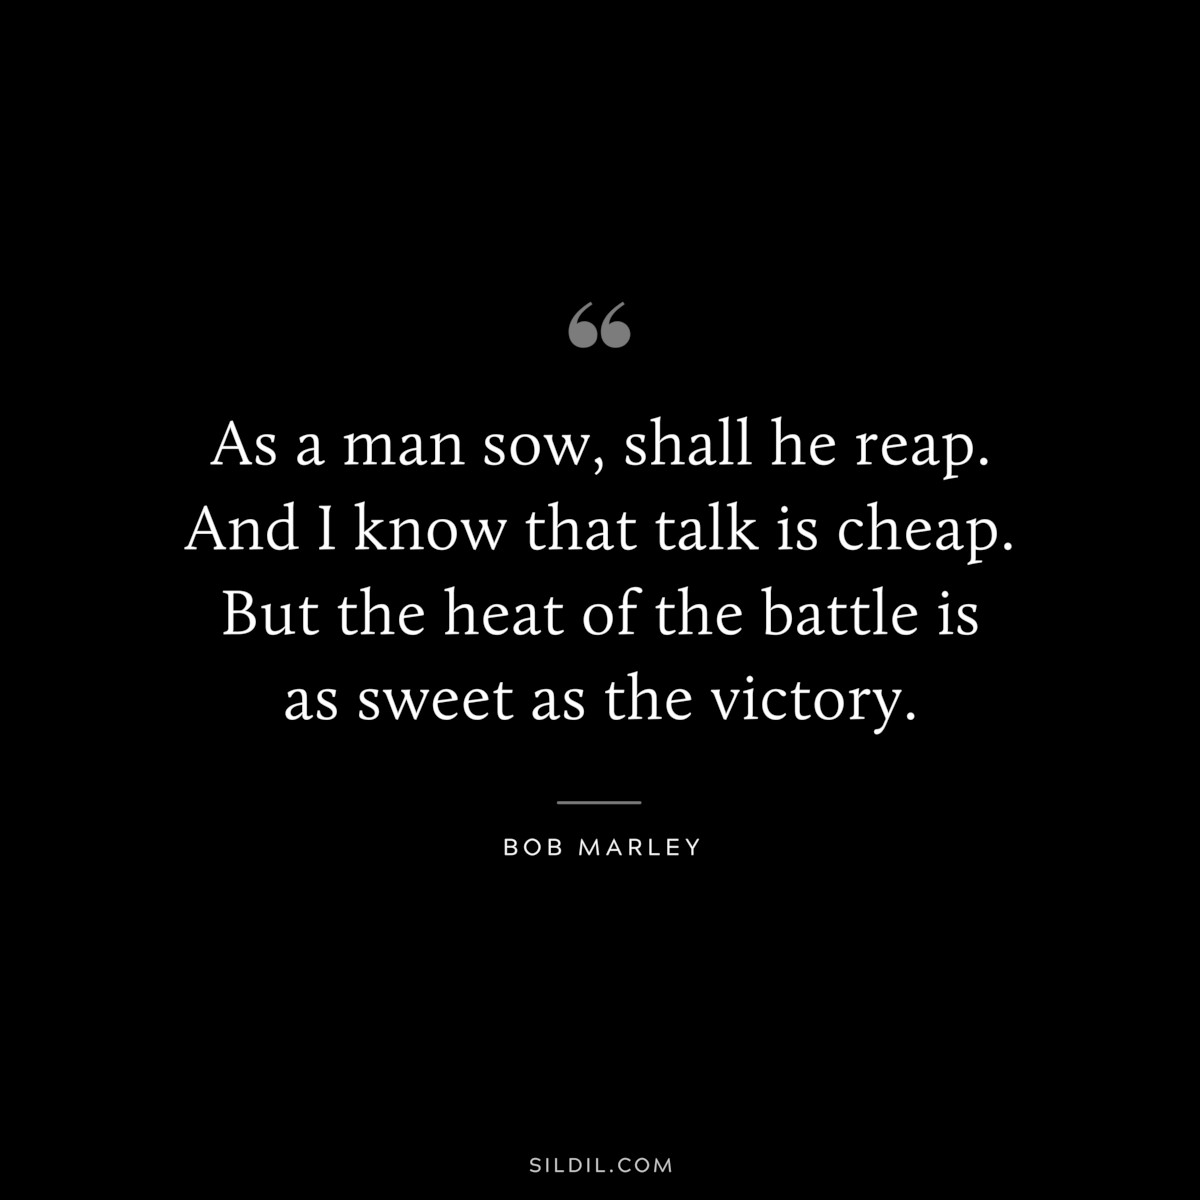 As a man sow, shall he reap. And I know that talk is cheap. But the heat of the battle is as sweet as the victory. ― Bob Marley